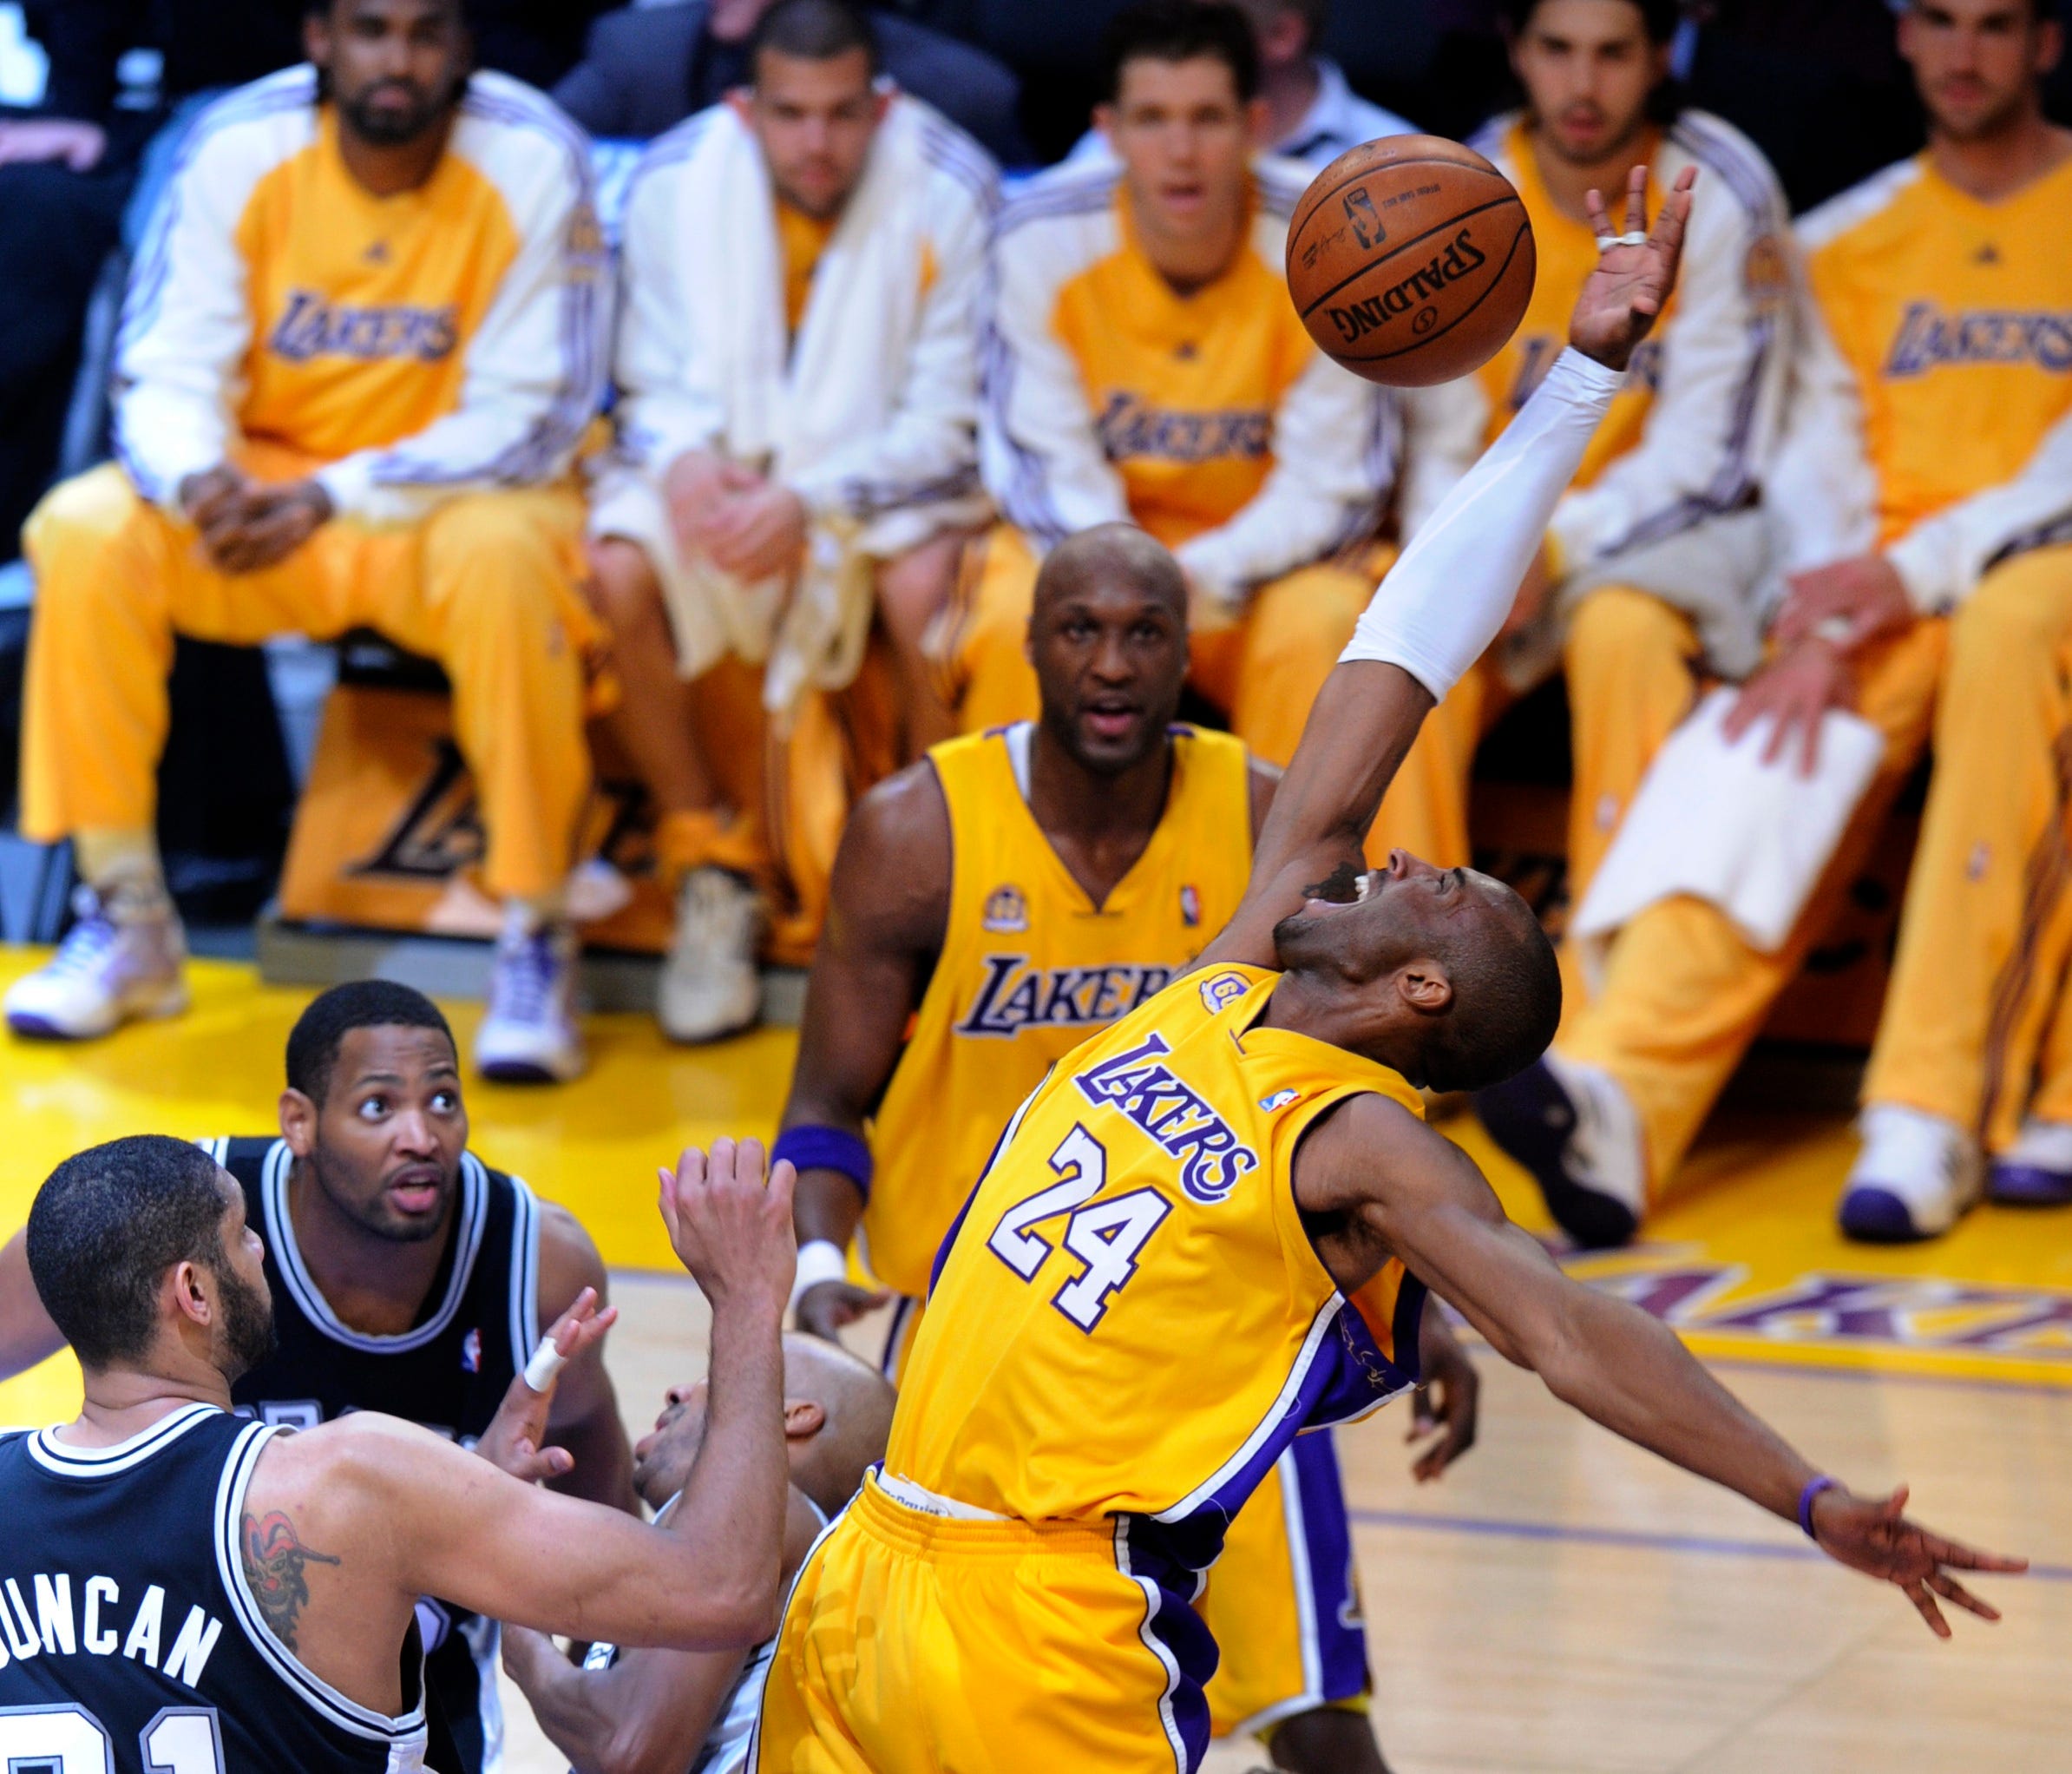 Kobe Bryant, right, loses the ball as he drives on Tim Duncan in the 2008 NBA playoffs.